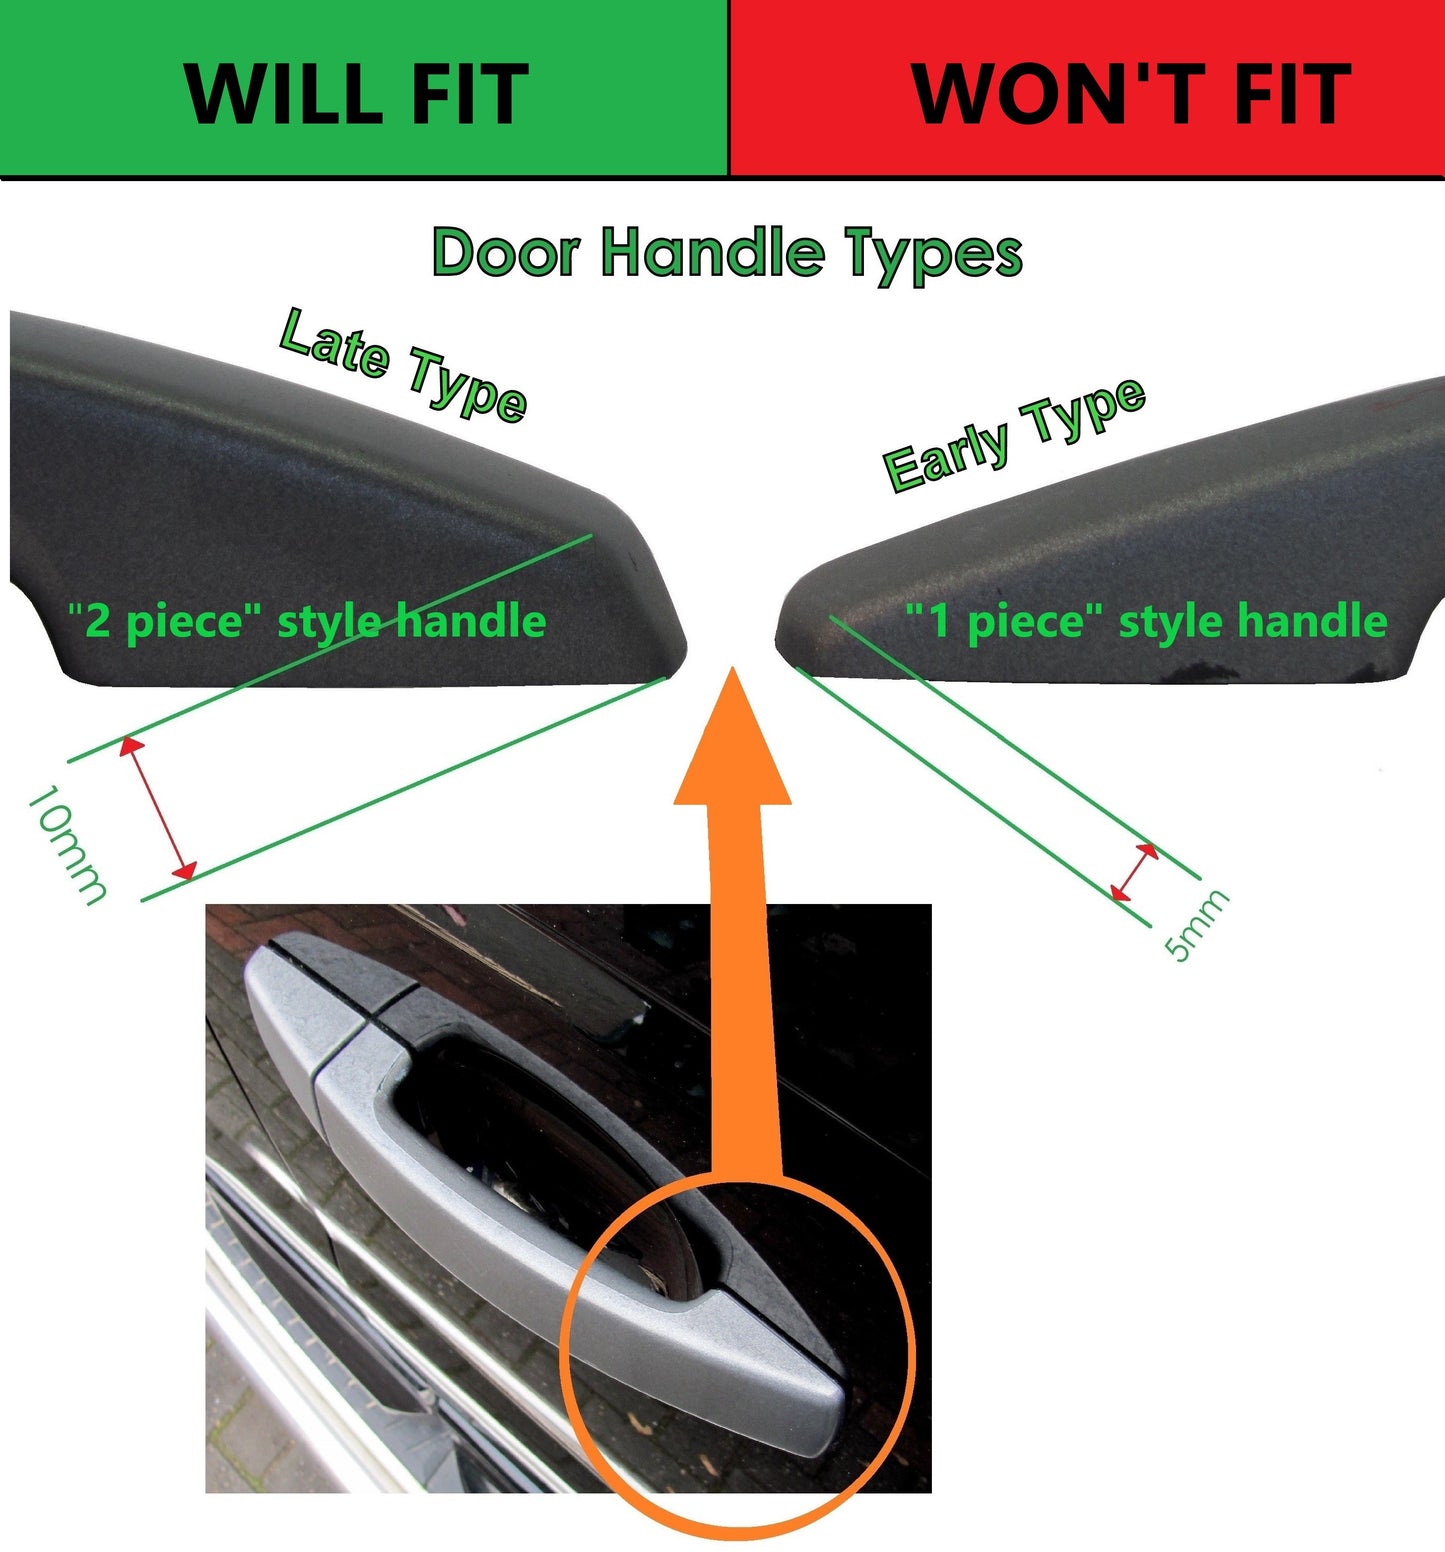 Door Handle "Skins" for Land Rover Discovery 3 fitted with 2 pc Handle - Matt Black